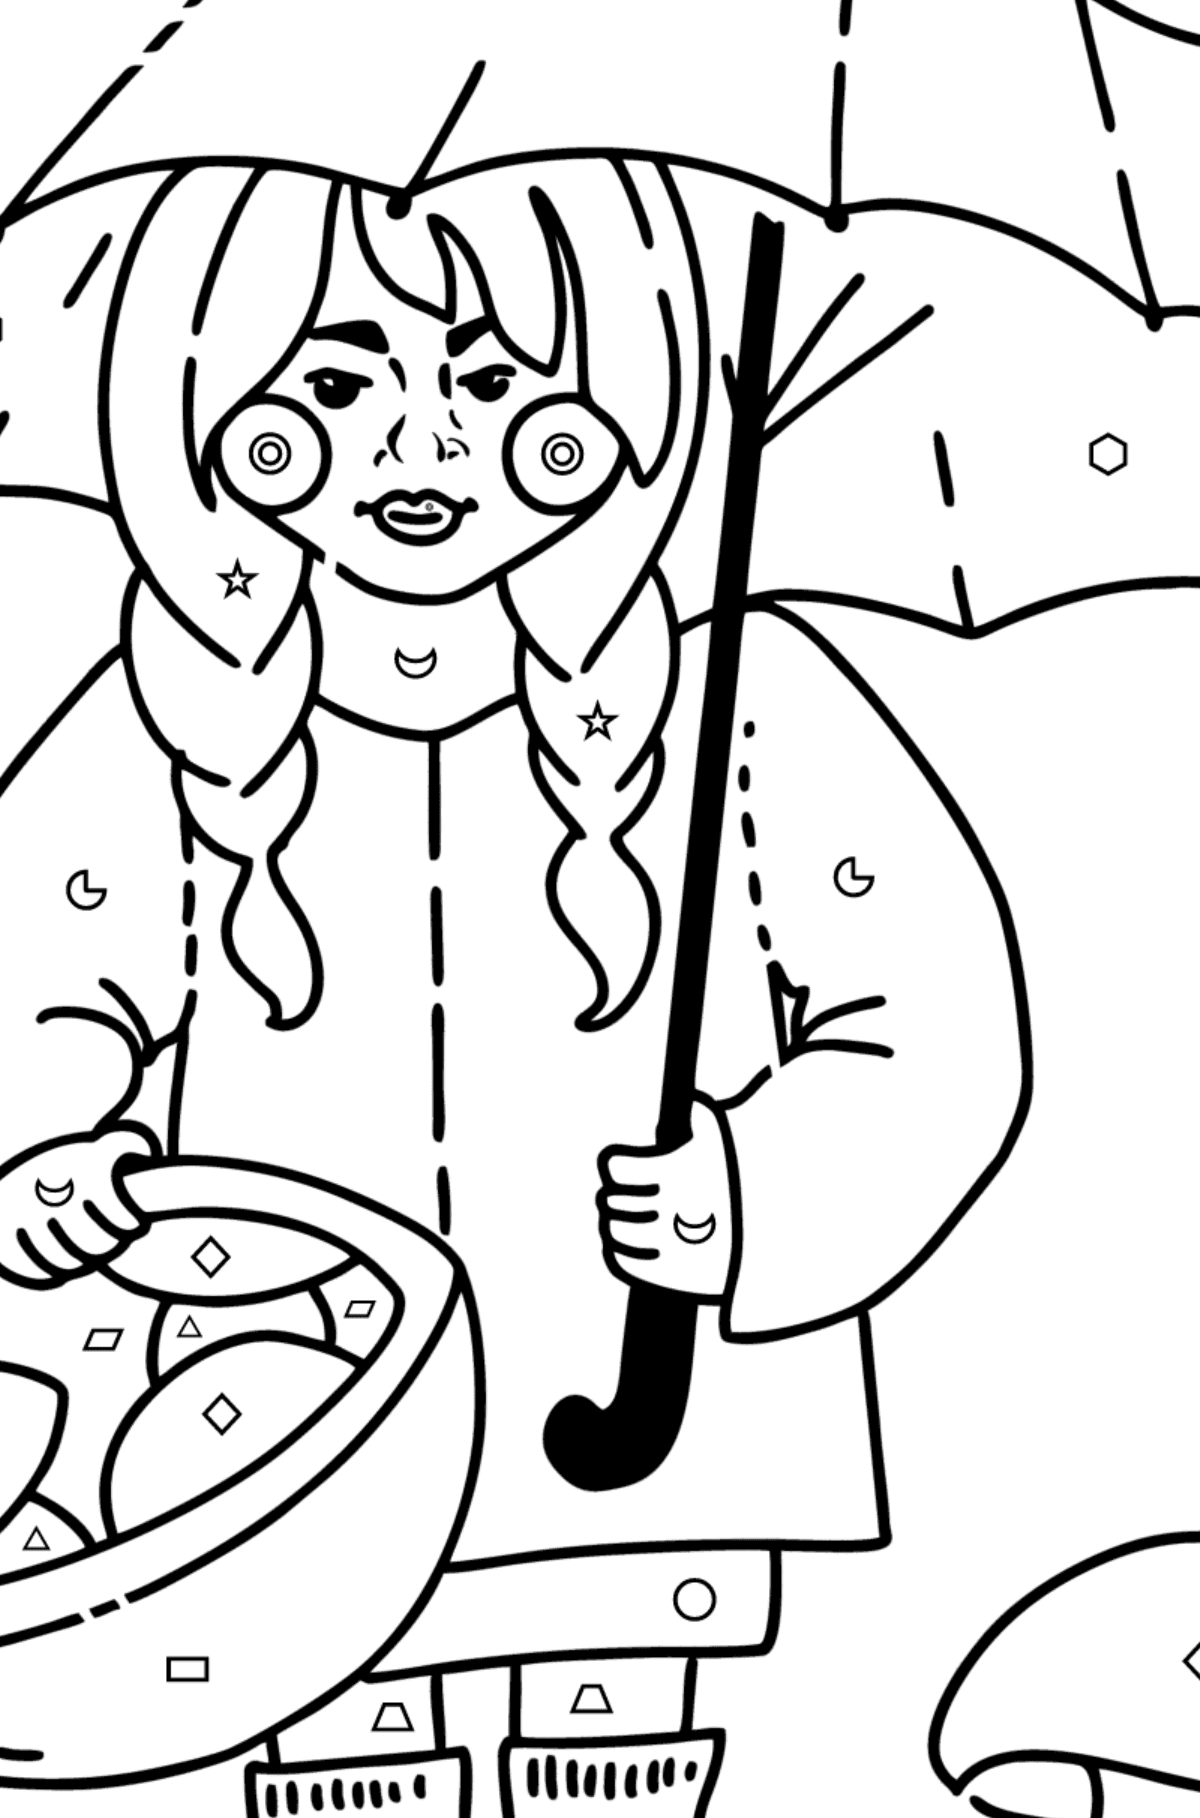 Coloring page - Girl picking mushrooms - Coloring by Geometric Shapes for Kids